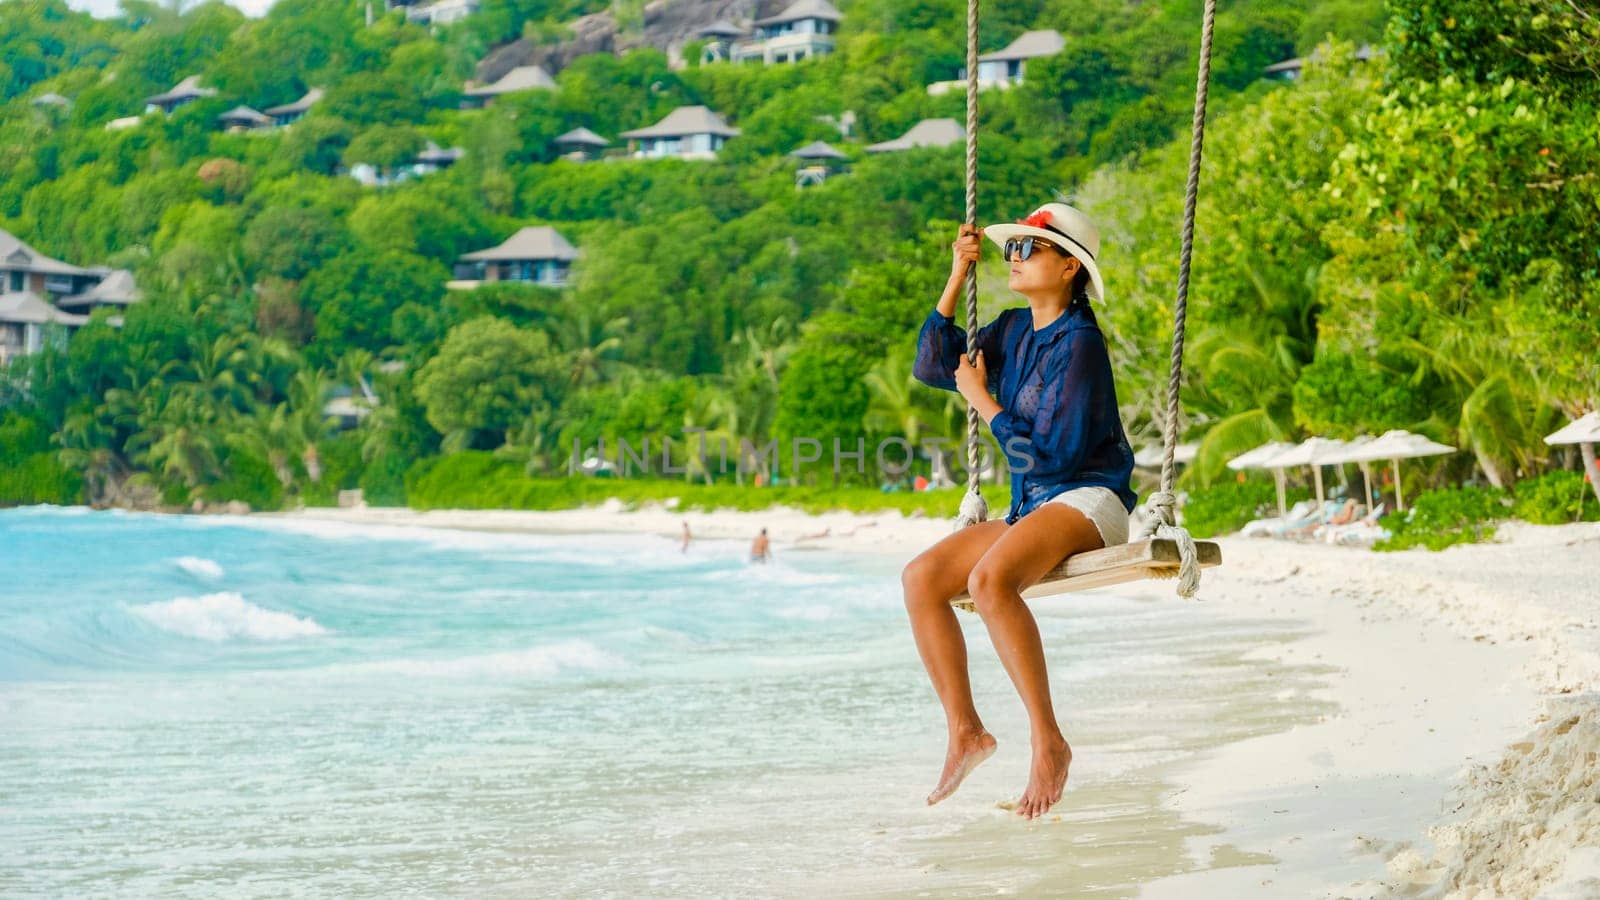 Young women at a swing on a tropical beach in Mahe Tropical Seychelles Islands by fokkebok